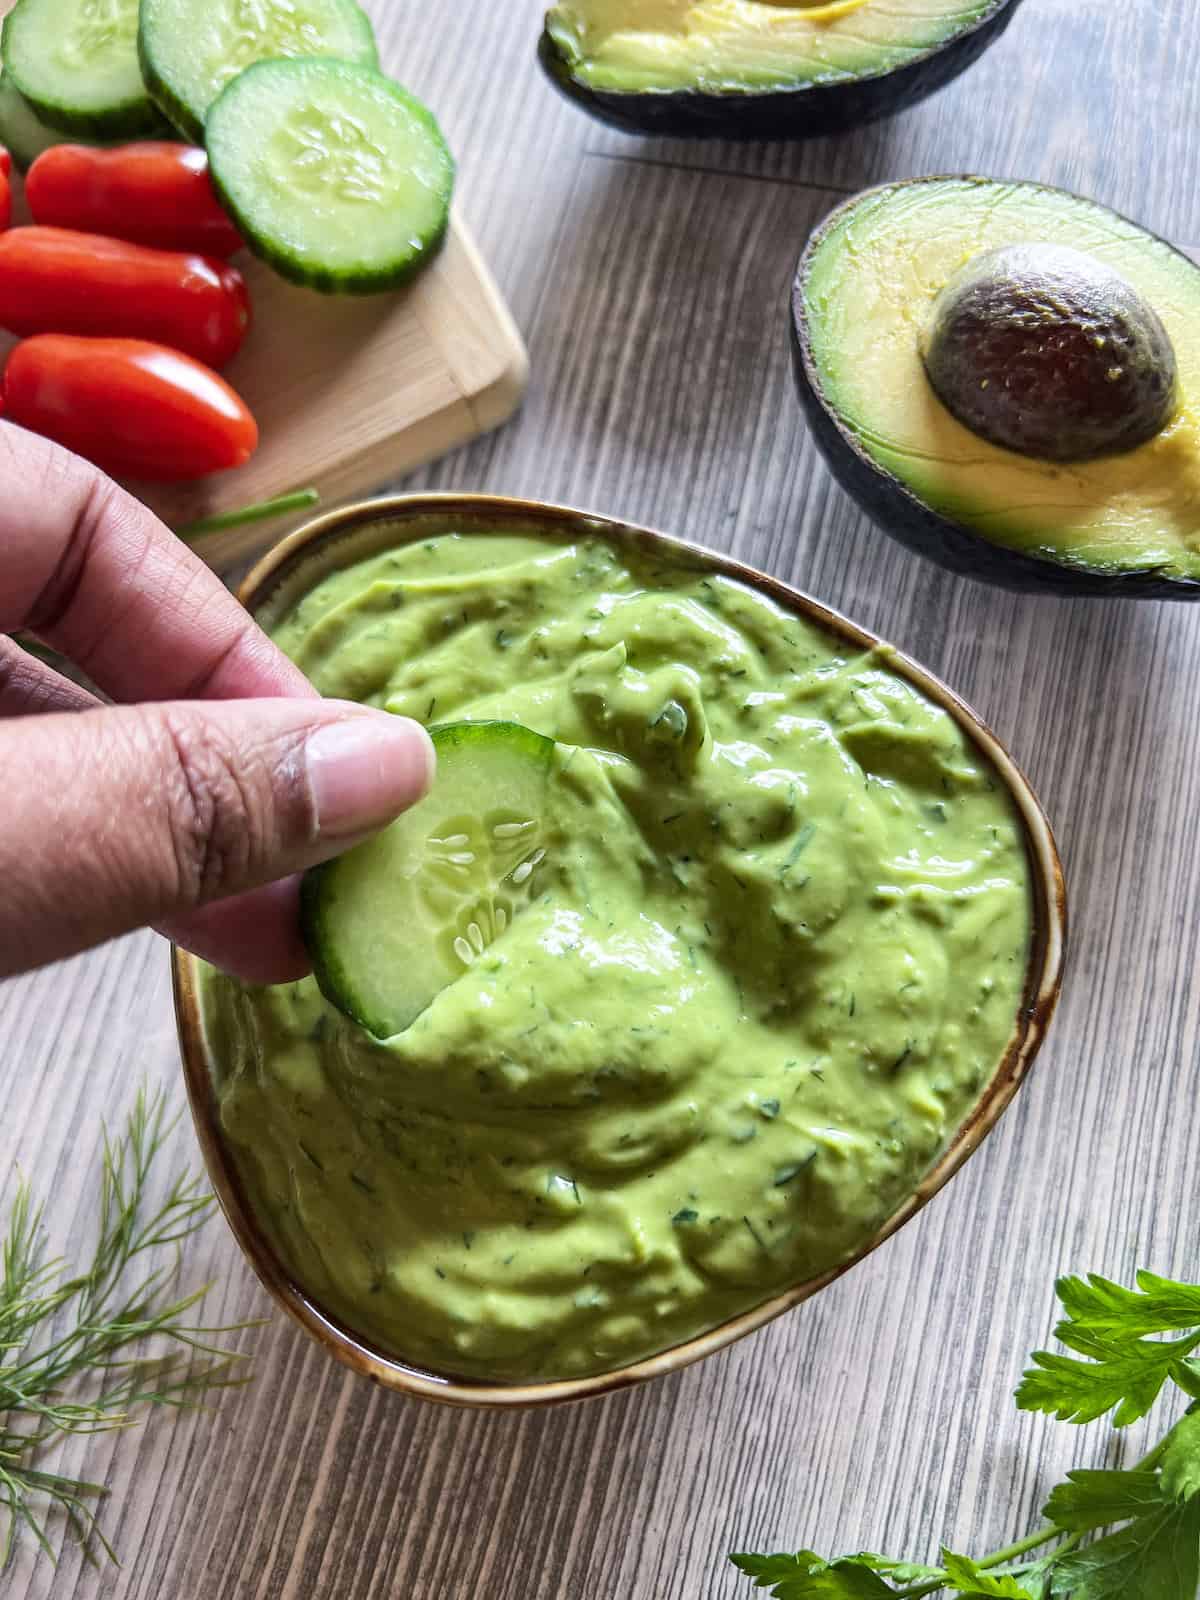 Brown hand dipping cucumber slice into small bowl of avocado ranch dressing.